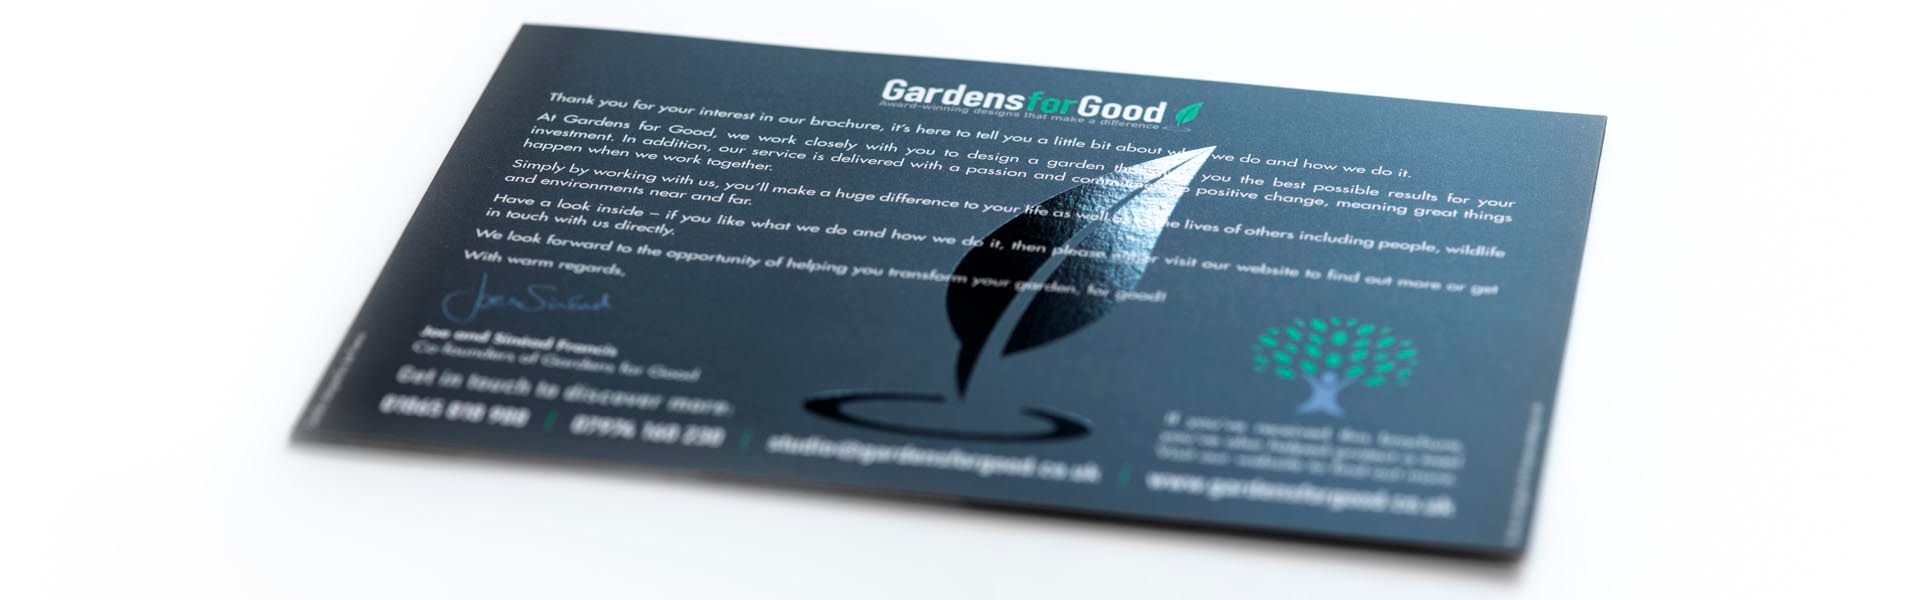 a thank you card from gardens for good